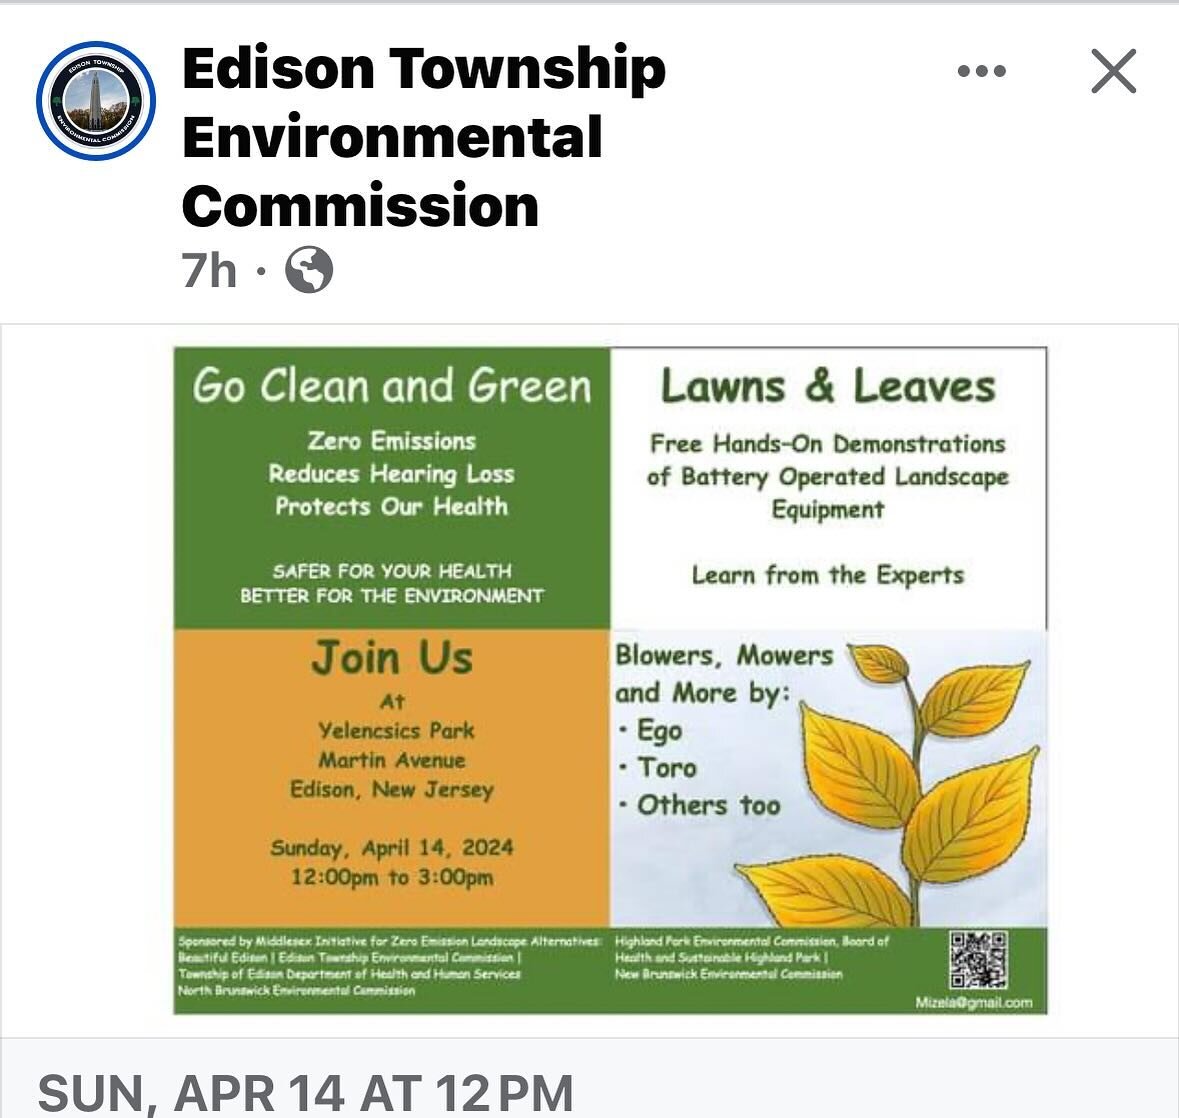 Come learn about new options in lawn care